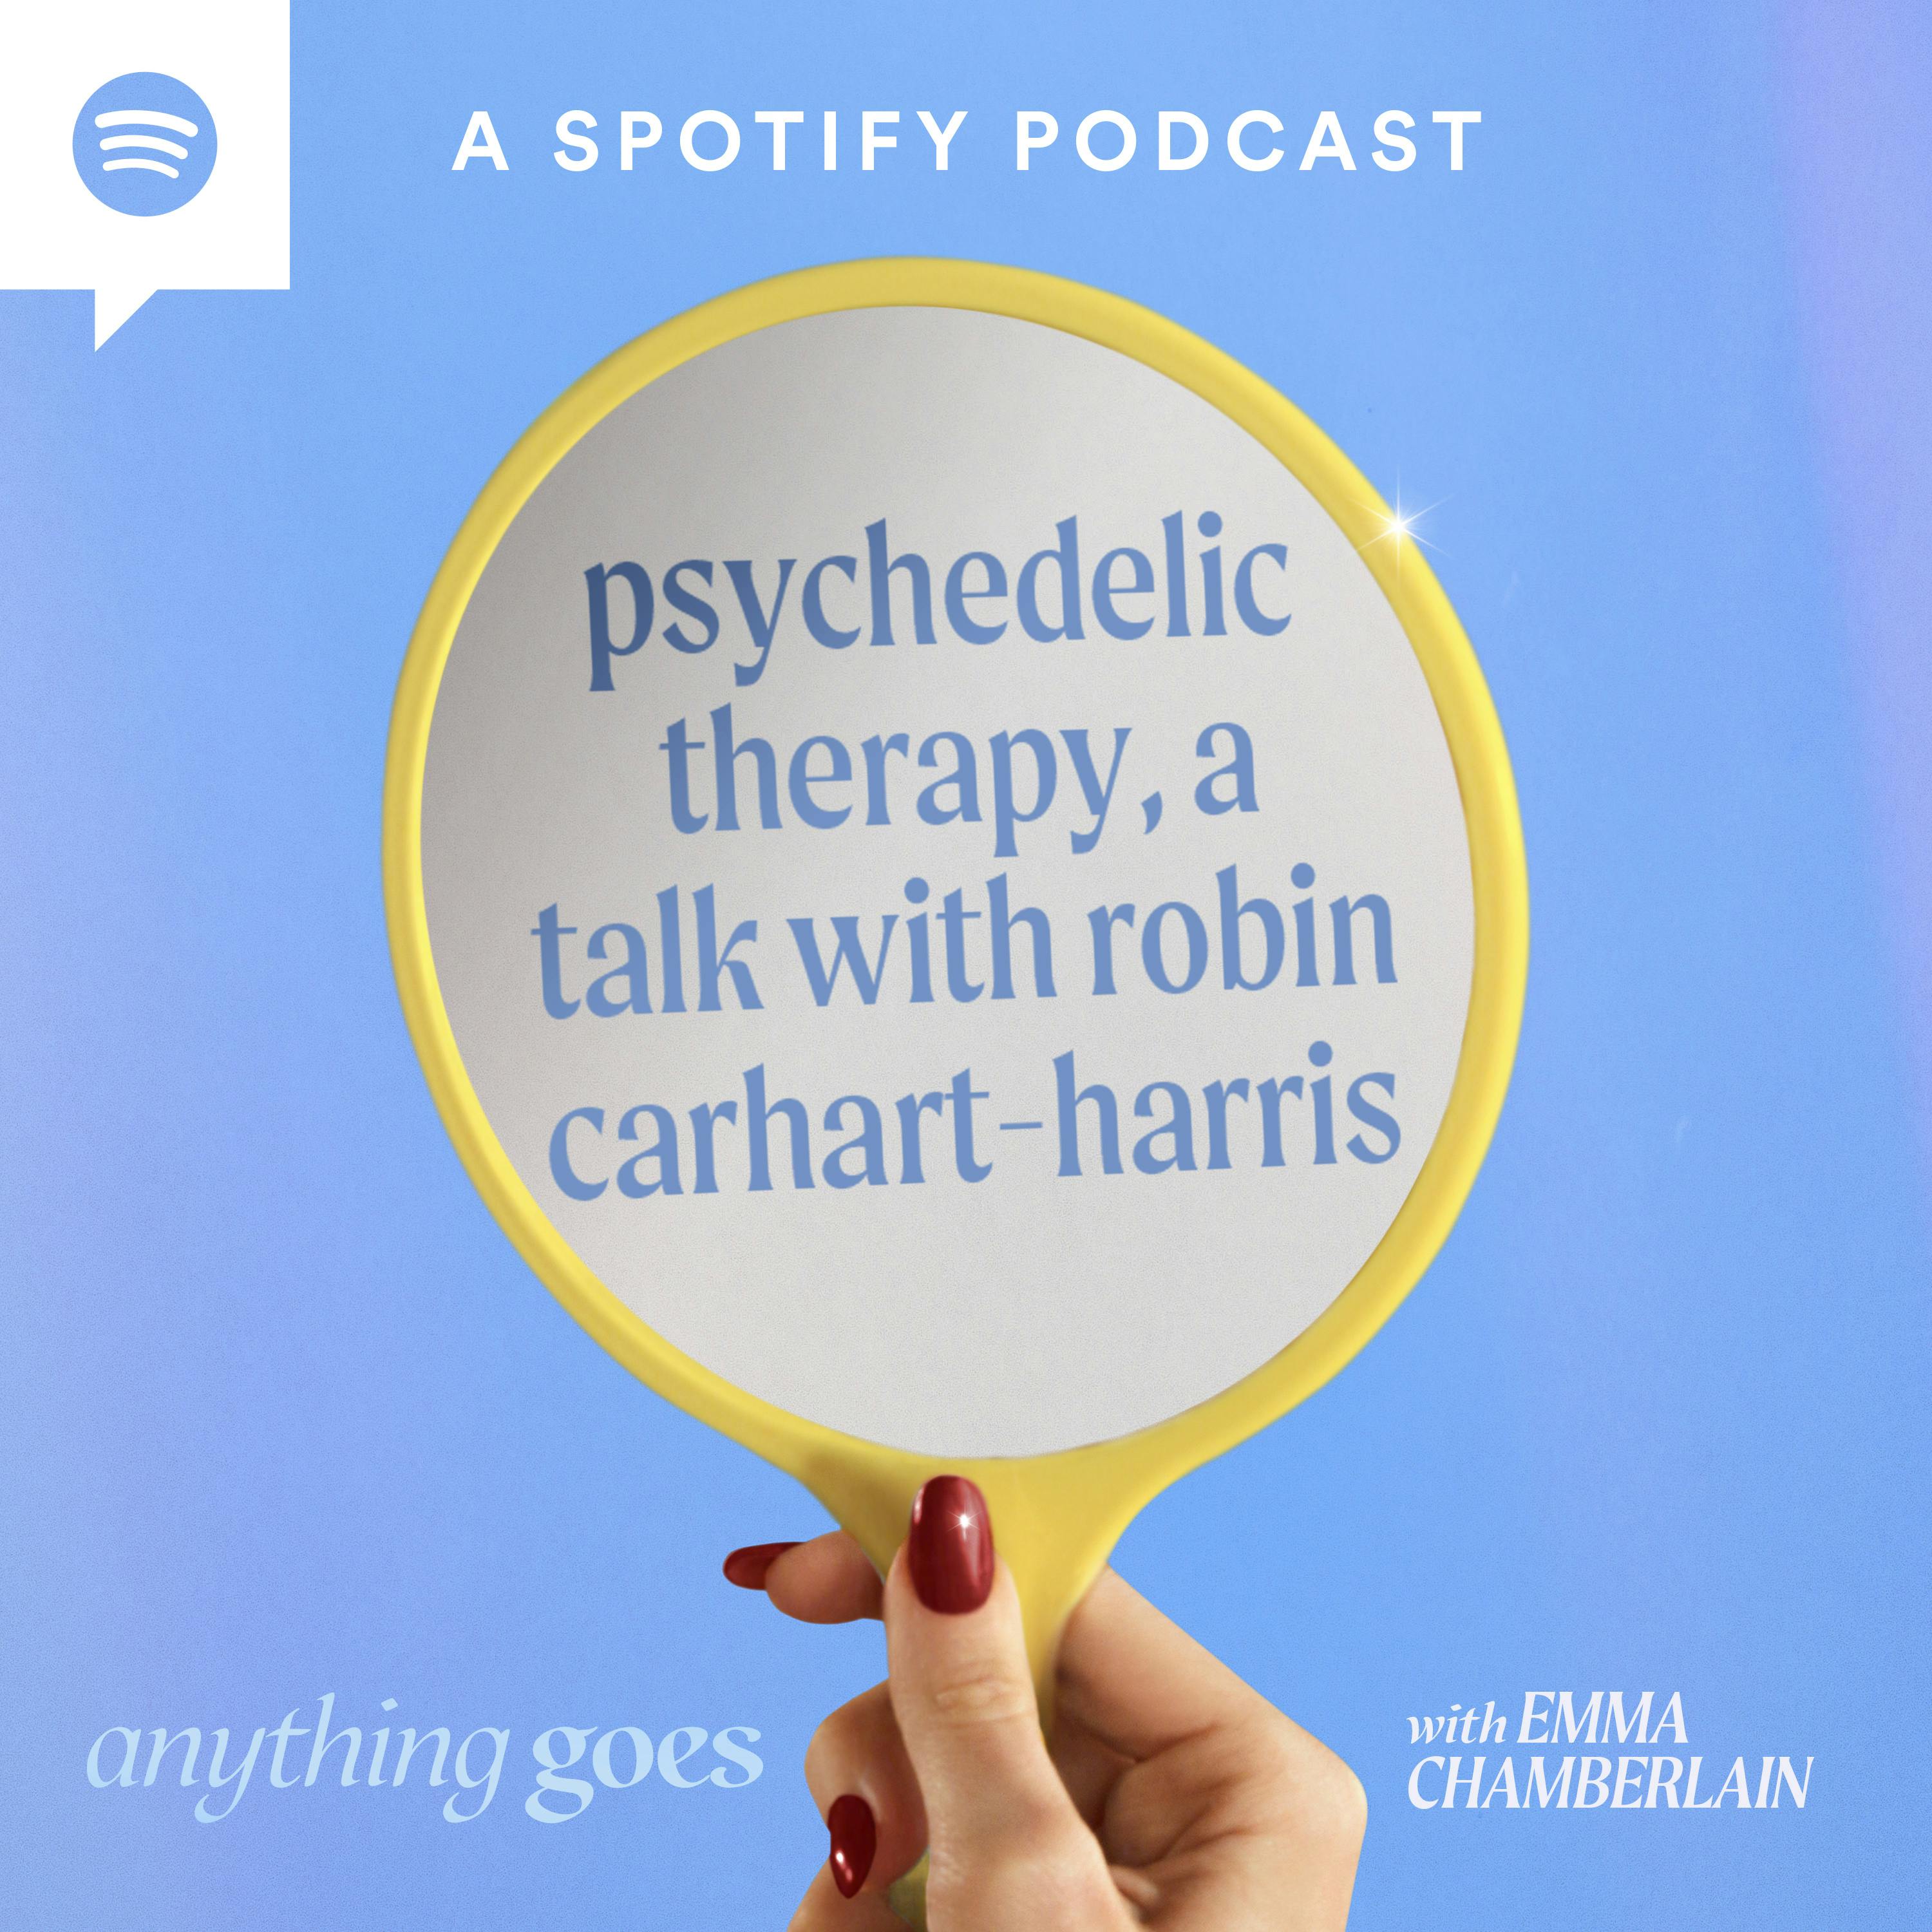 psychedelic therapy, a talk with robin carhart-harris [video]